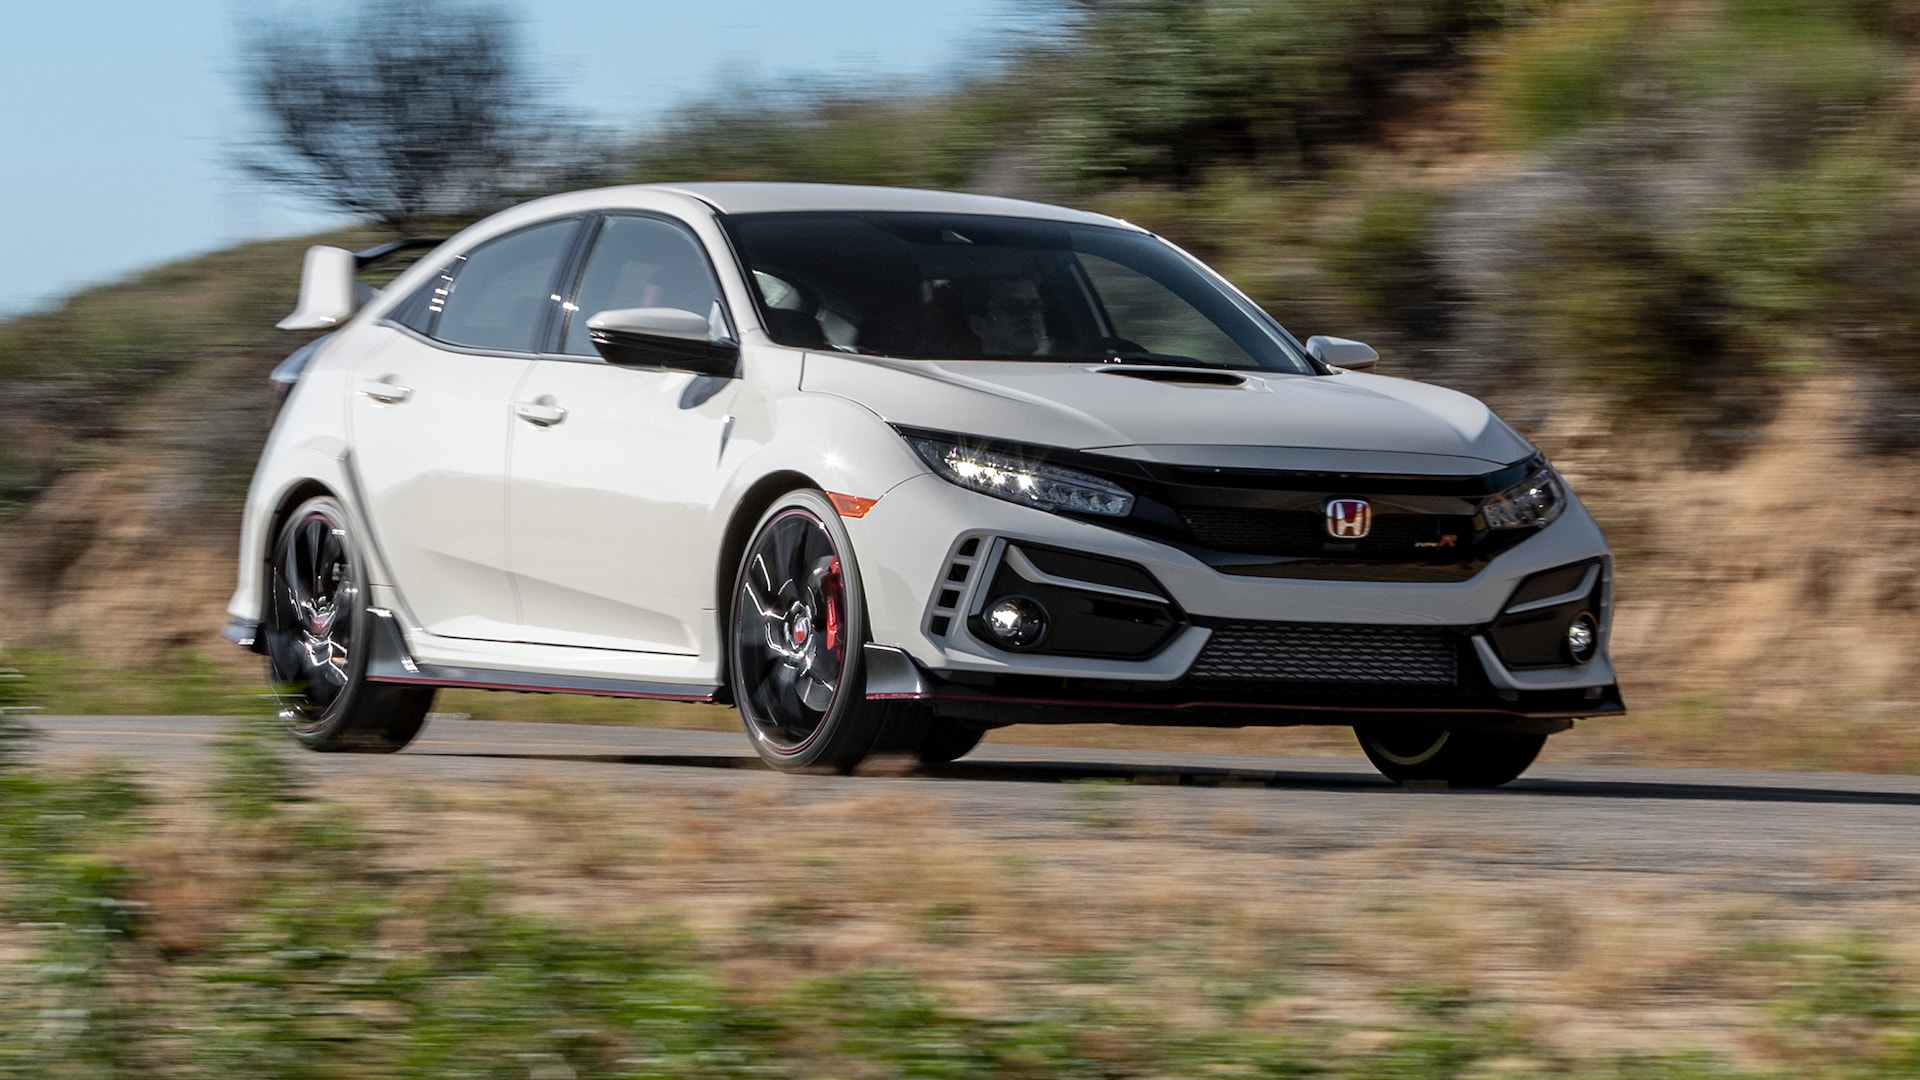 First Drive: The New 2020 Honda Civic Type R Gets Even Better (Mostly)